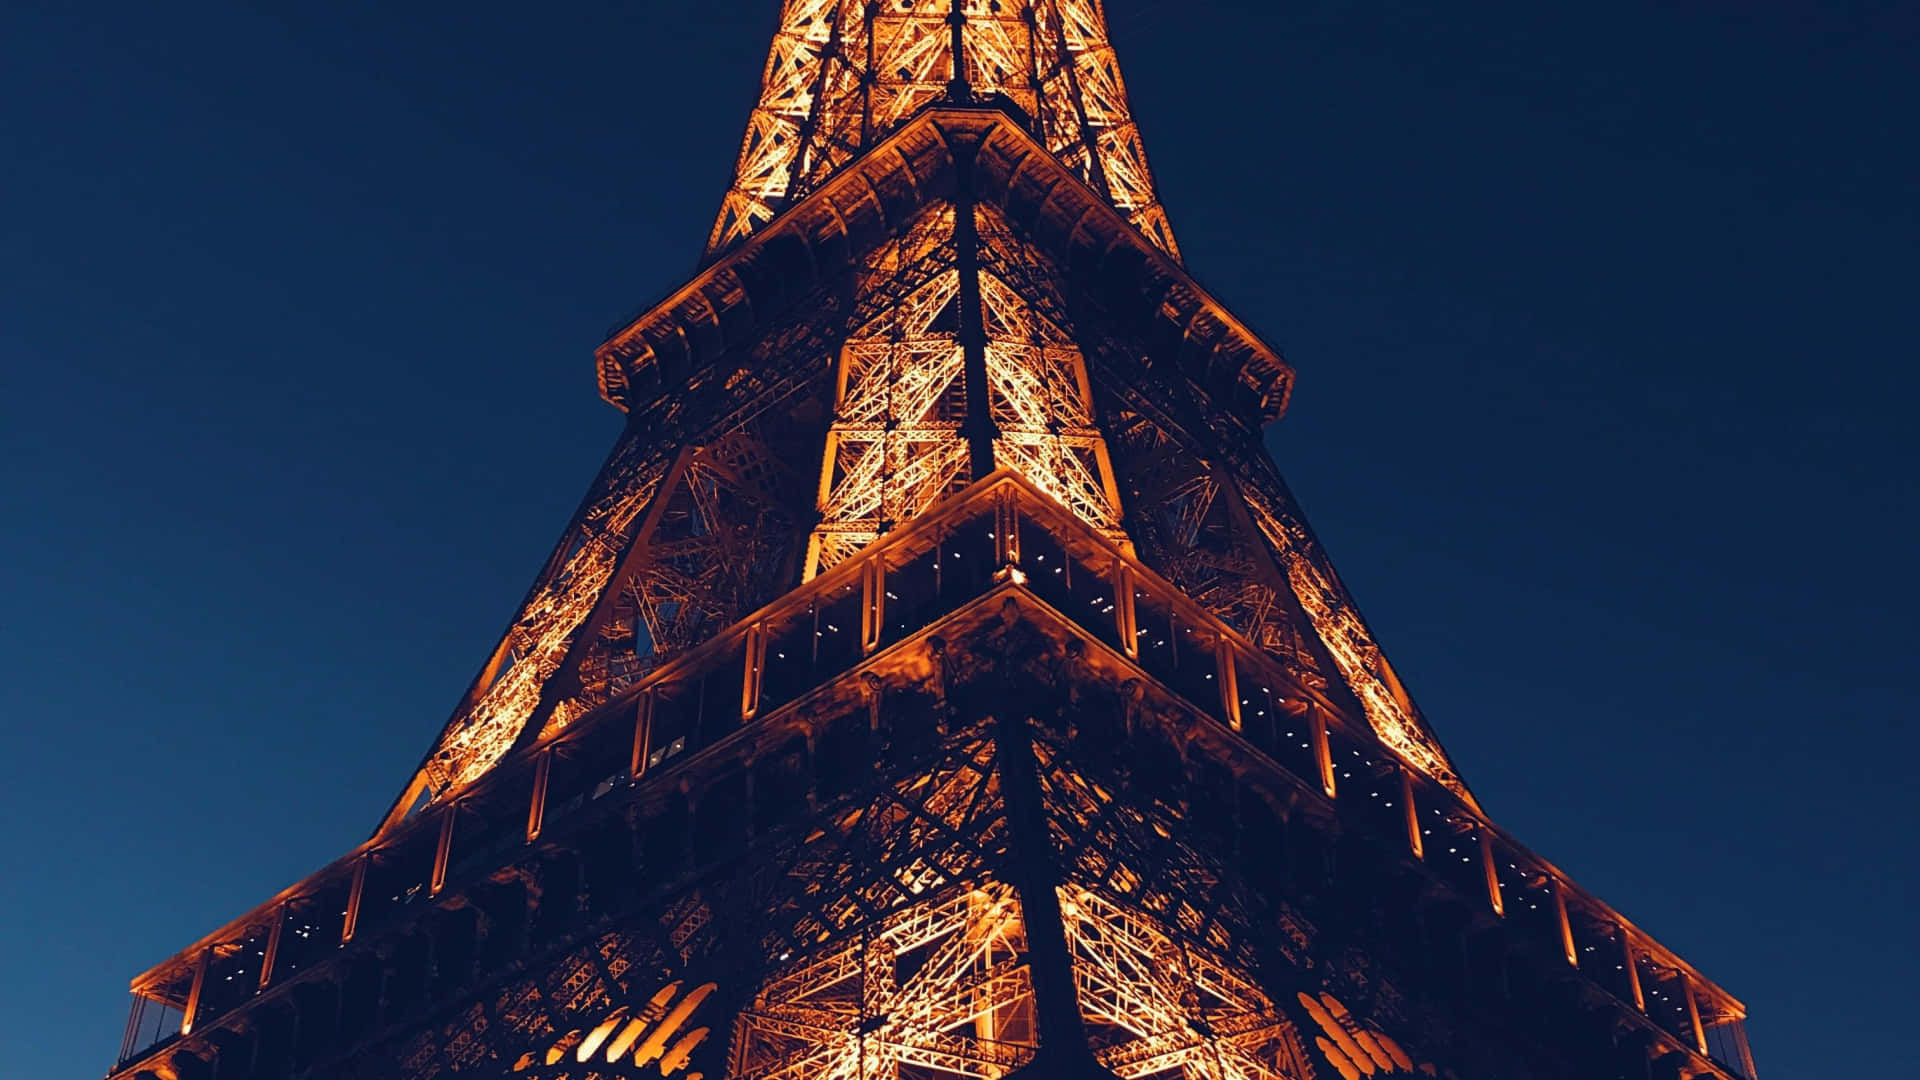 Spend the night under the stars and the spectacular Eiffel Tower